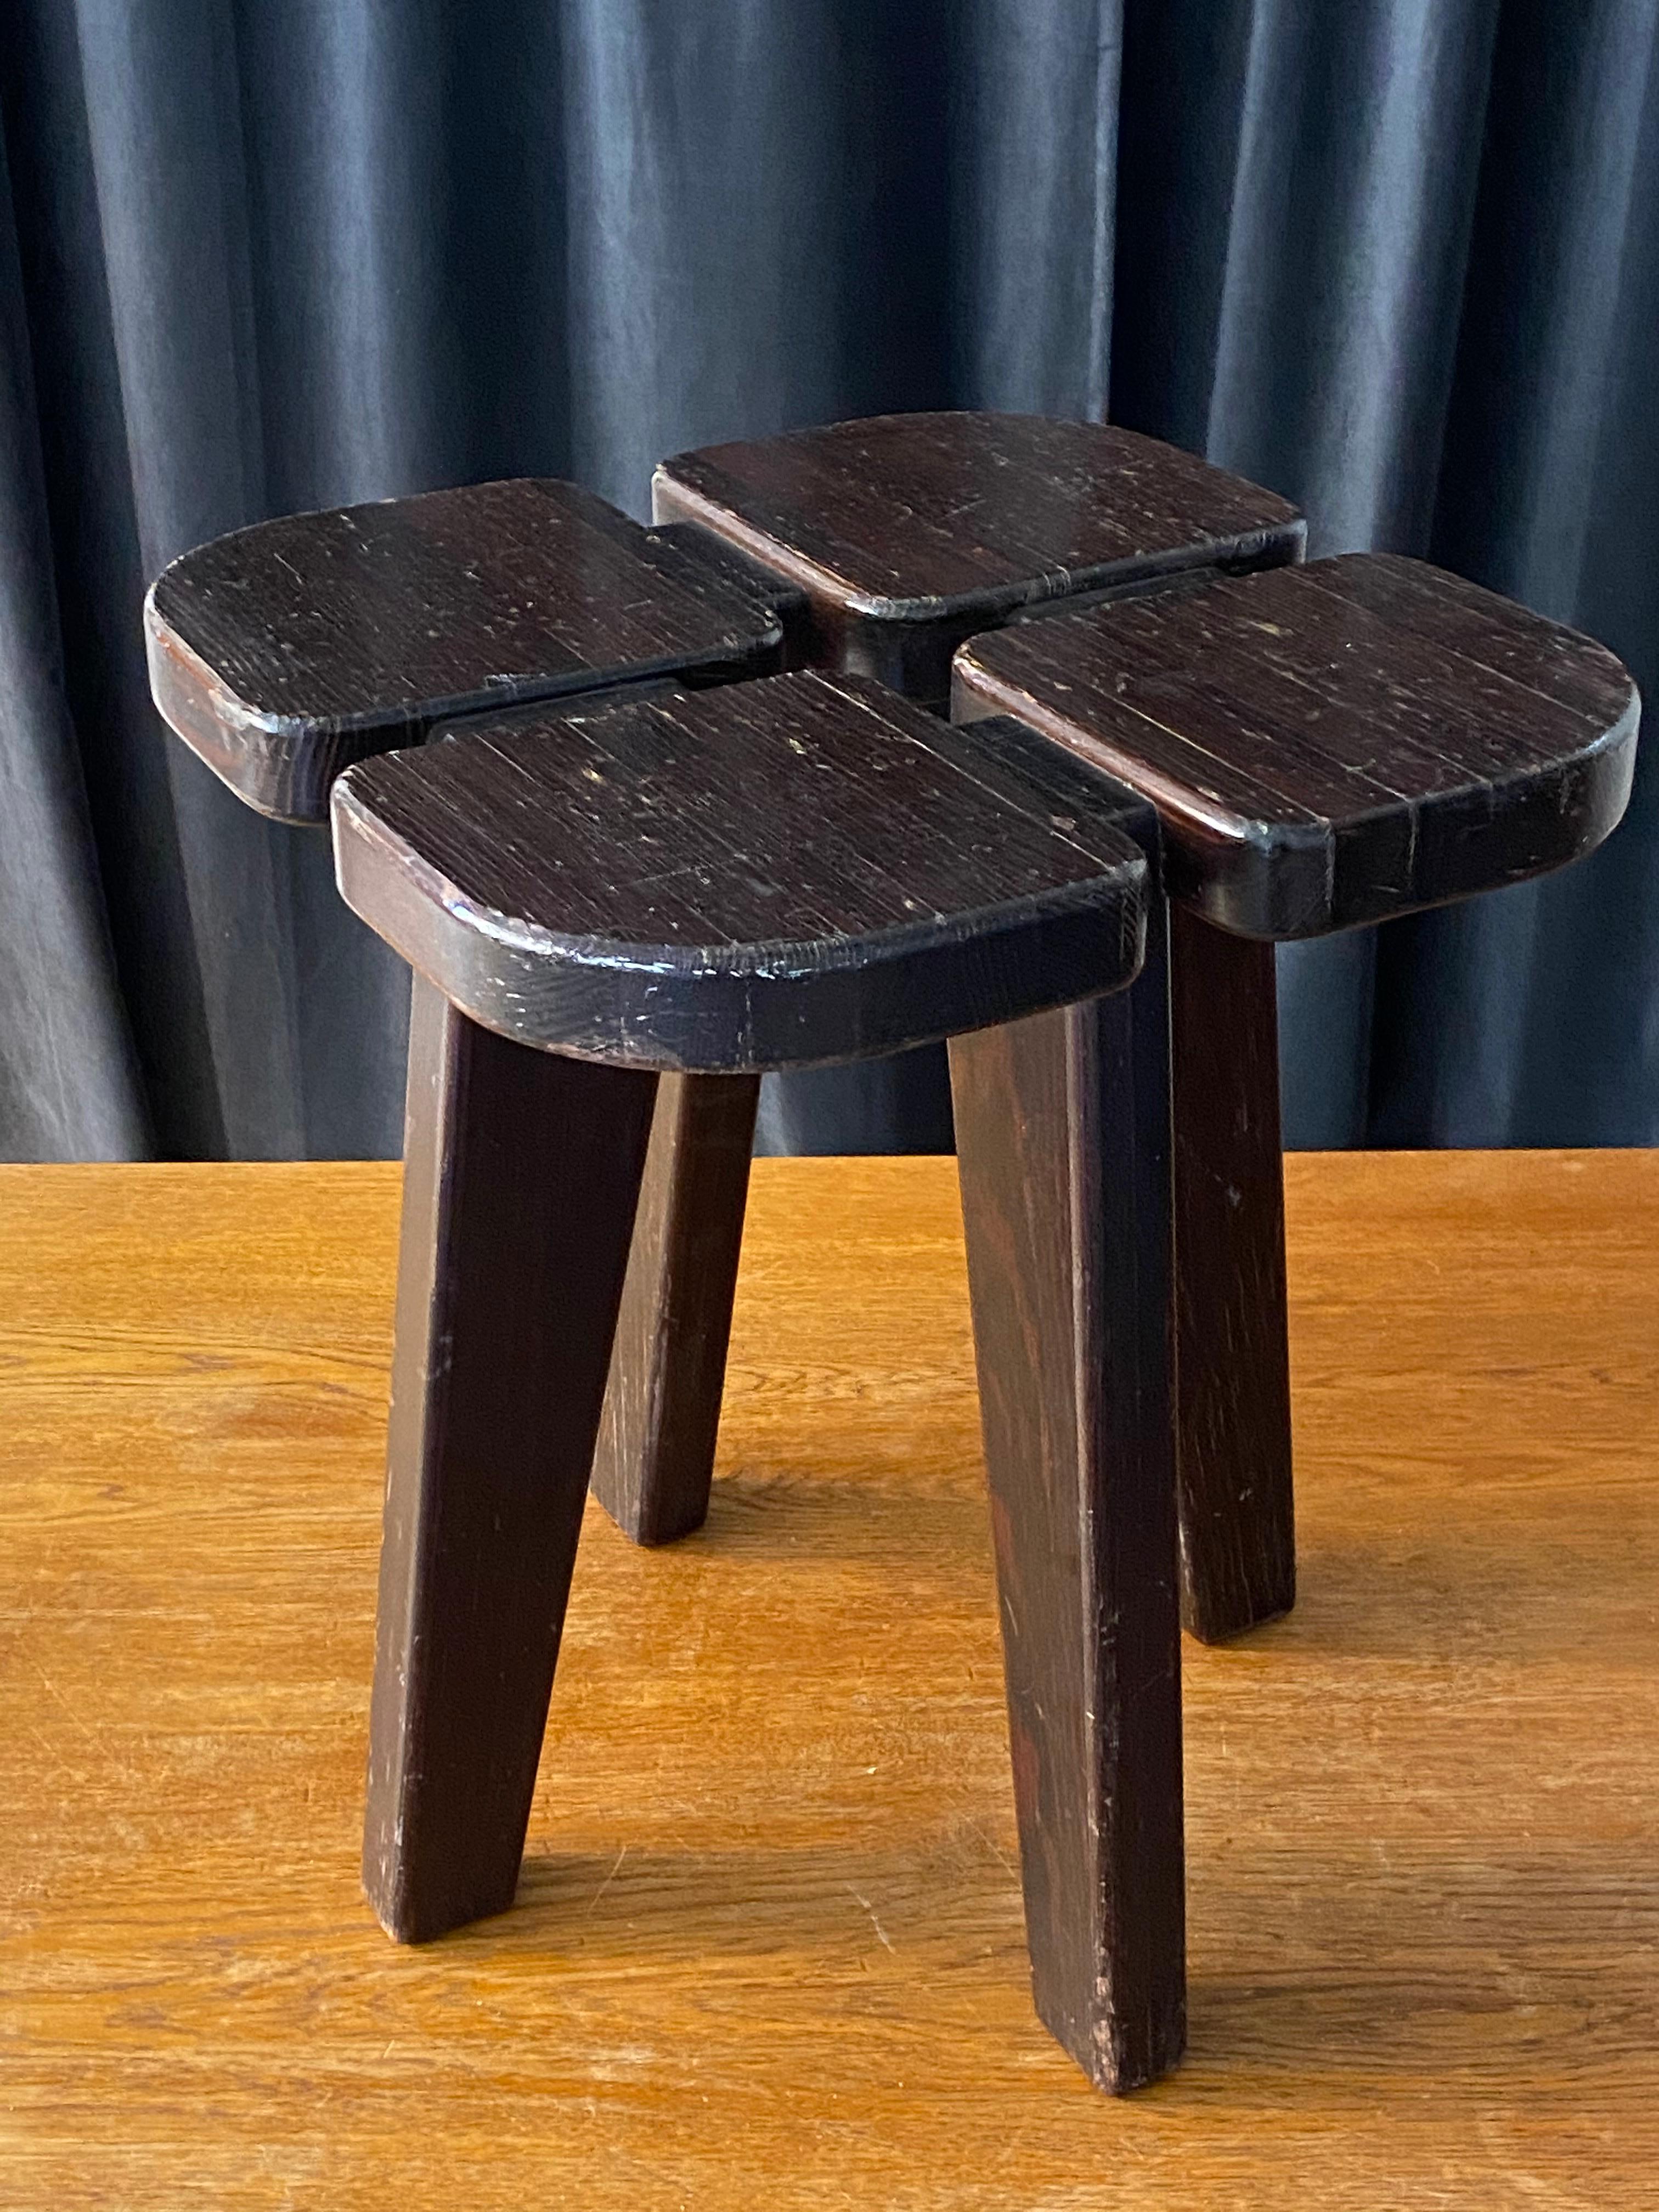 A highly functionalist stool, designed by Finnish Lisa Johansson-Pape, produced by Kervo Snickerifabrik for Oy Stockmann Ab, 1970s. Labeled. In original dark stained pine.

Other designers working in similar functionalist ethos include Pierre